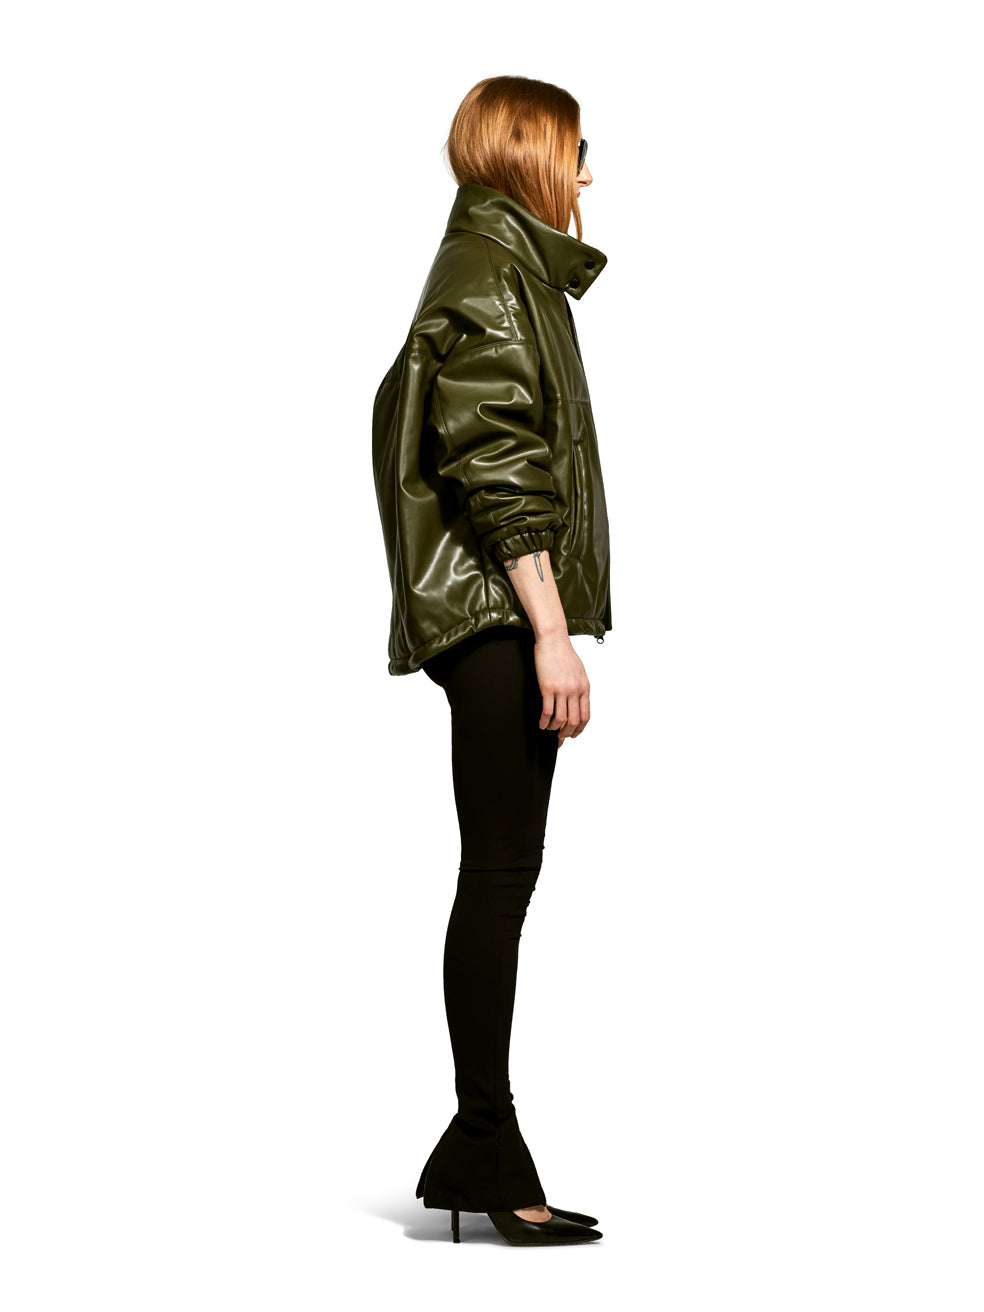 Billy Olive Green Ethical Canadian Fashion Womens Cropped Bomber Cold Weather Coat